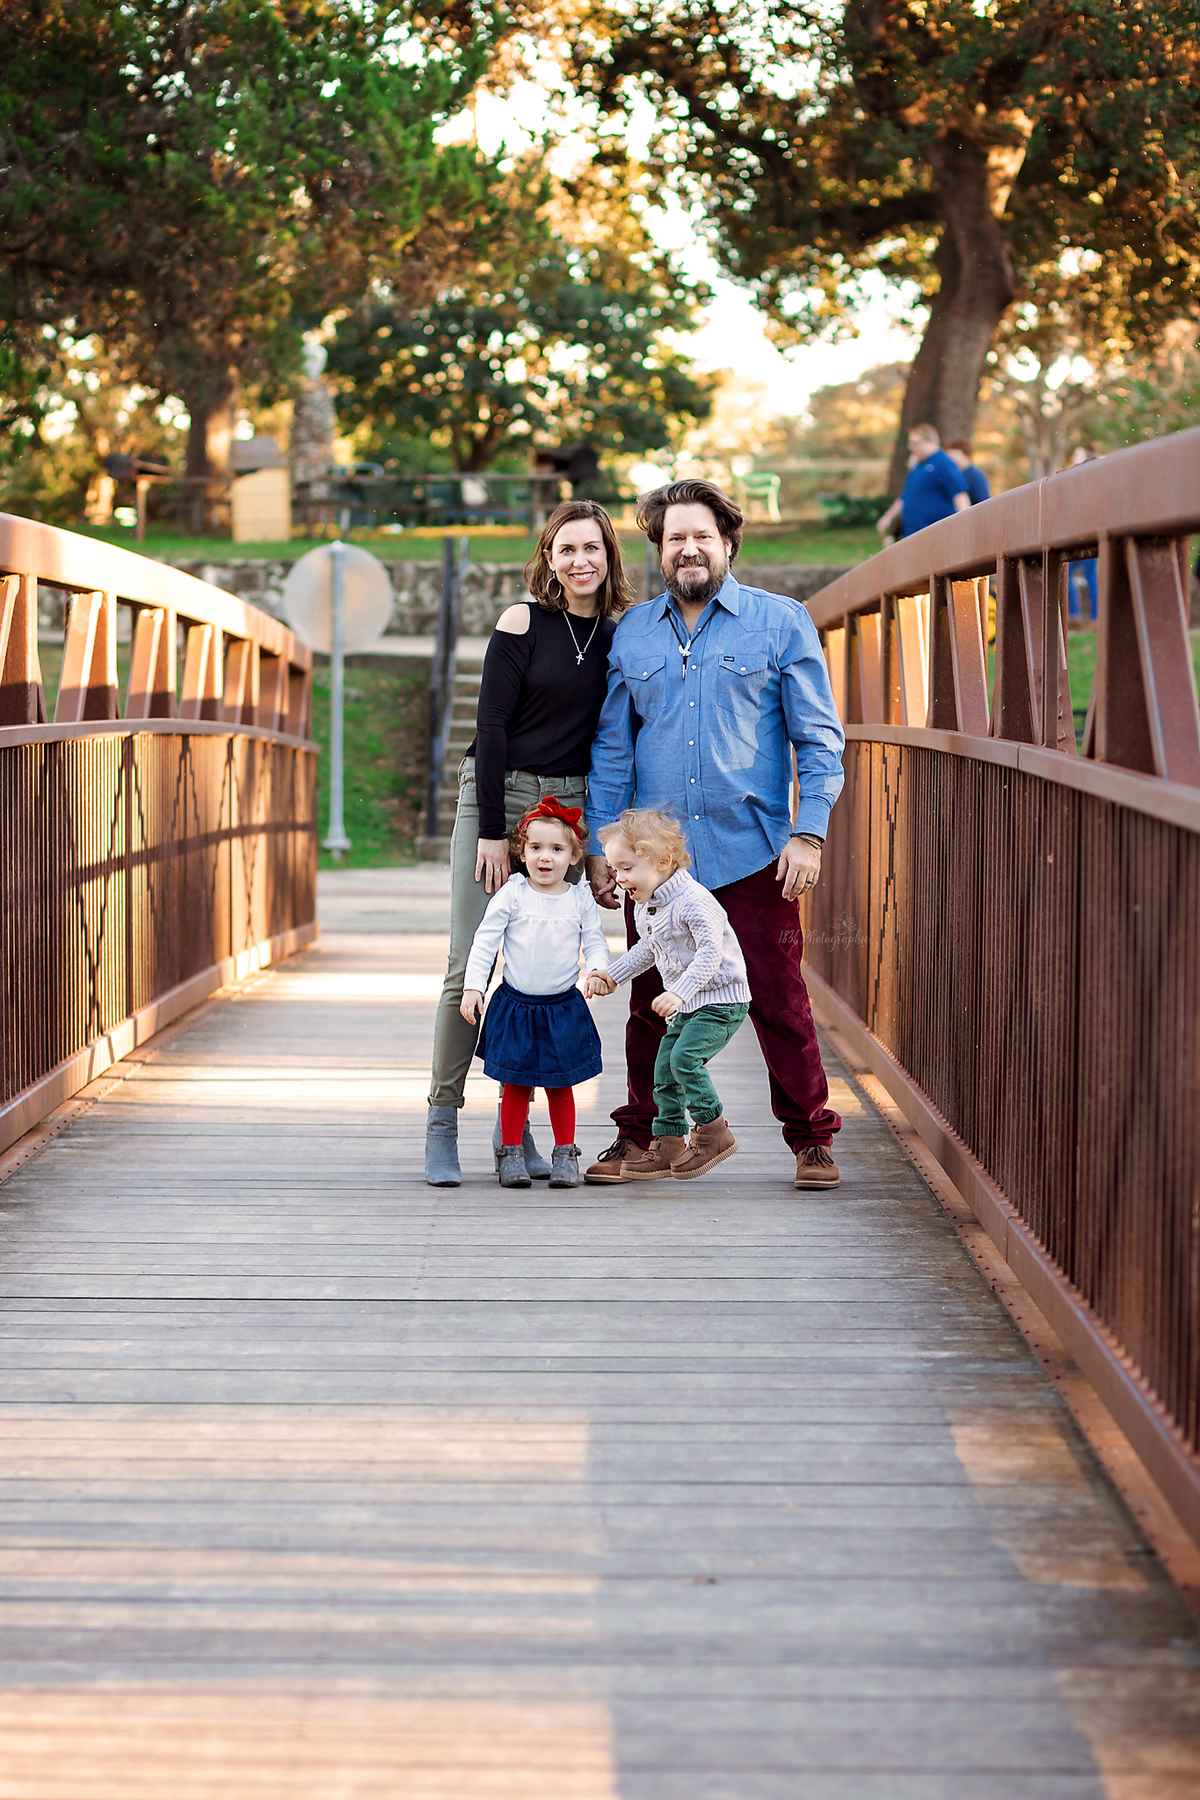 Unleash family fun with twins at Landa Park, New Braunfels. A laid-back session capturing candid moments for young parents seeking a relaxed and enjoyable photo experience.